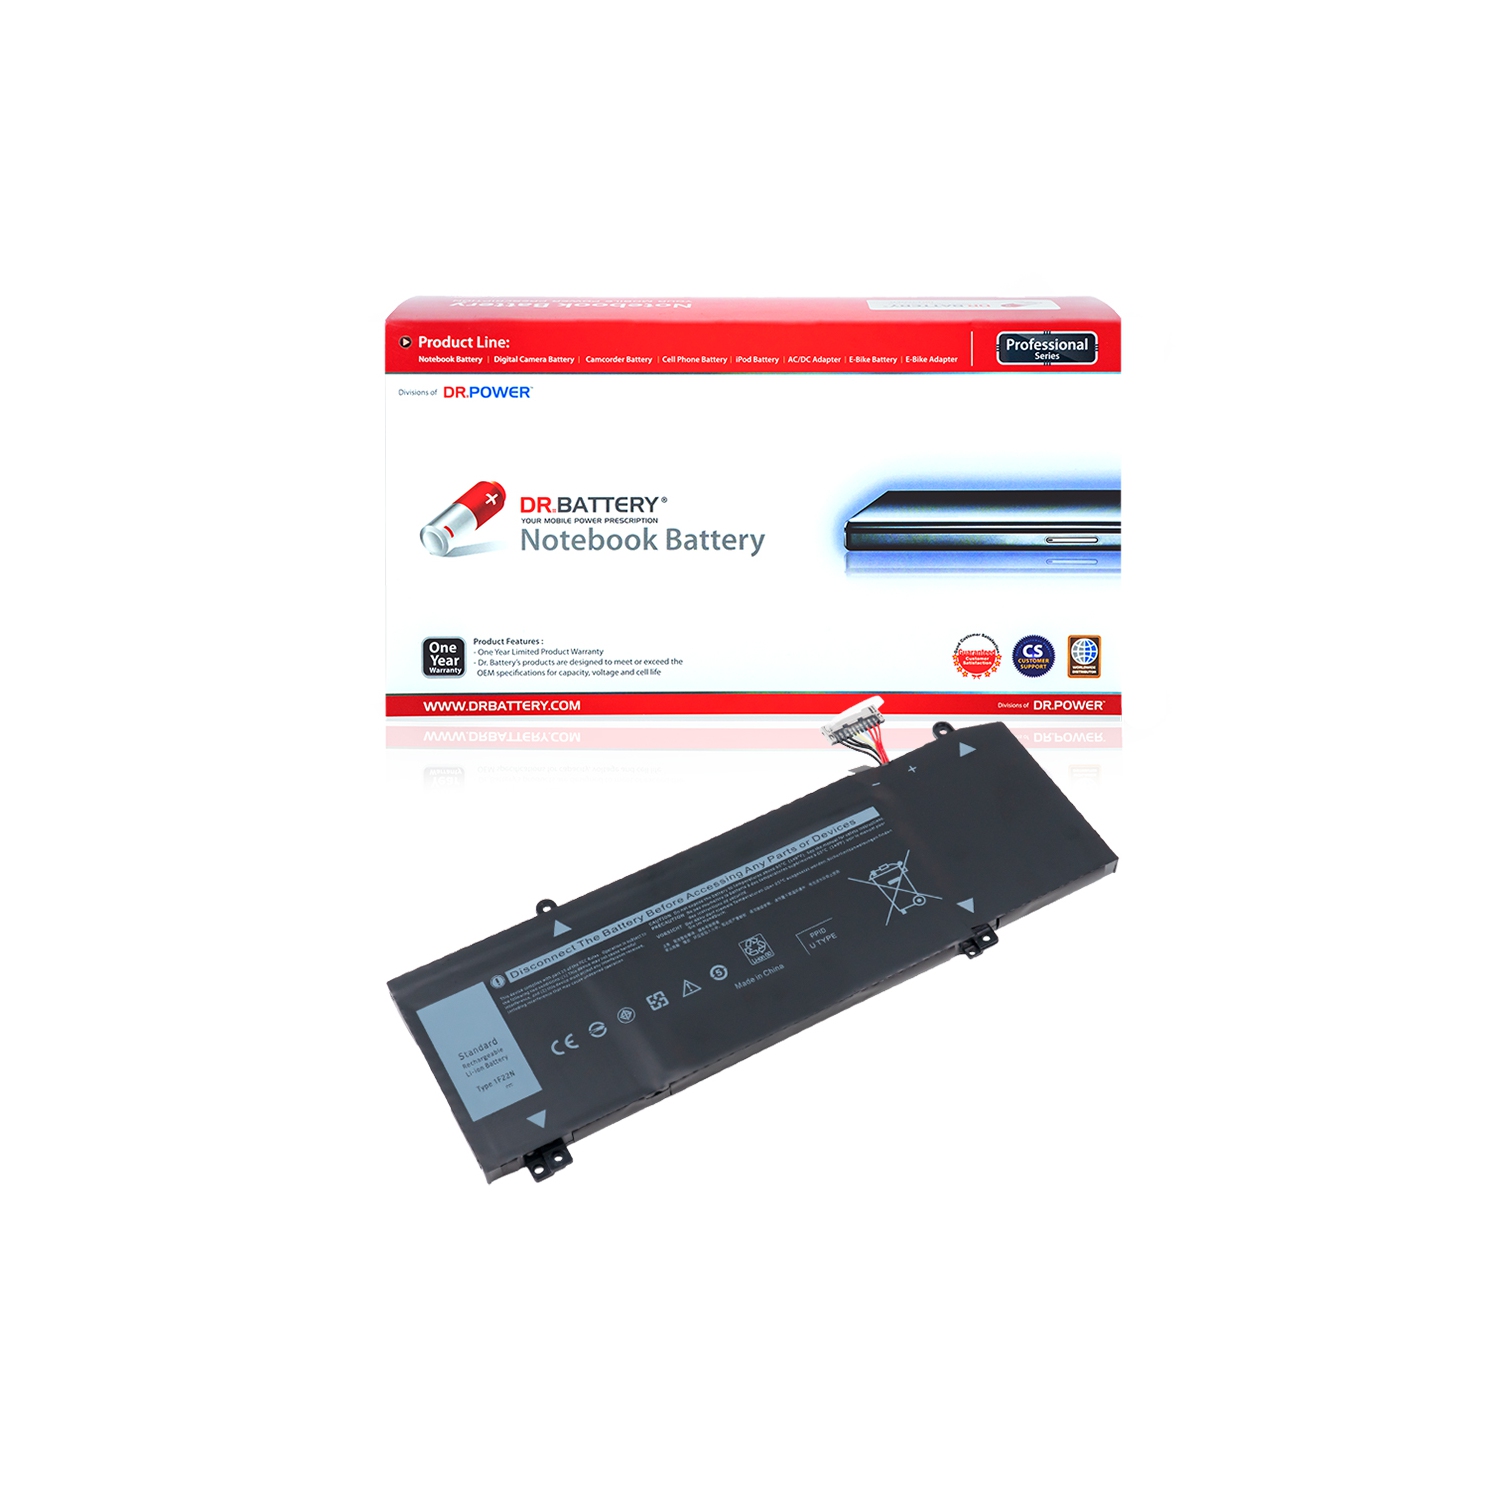 DR. BATTERY - Replacement for Dell G7 15 7590-D2885B / 7590-D3885B / 7590-D3888B / 7590-R2742KB / 1F22N / XRGXX / 06YV0V